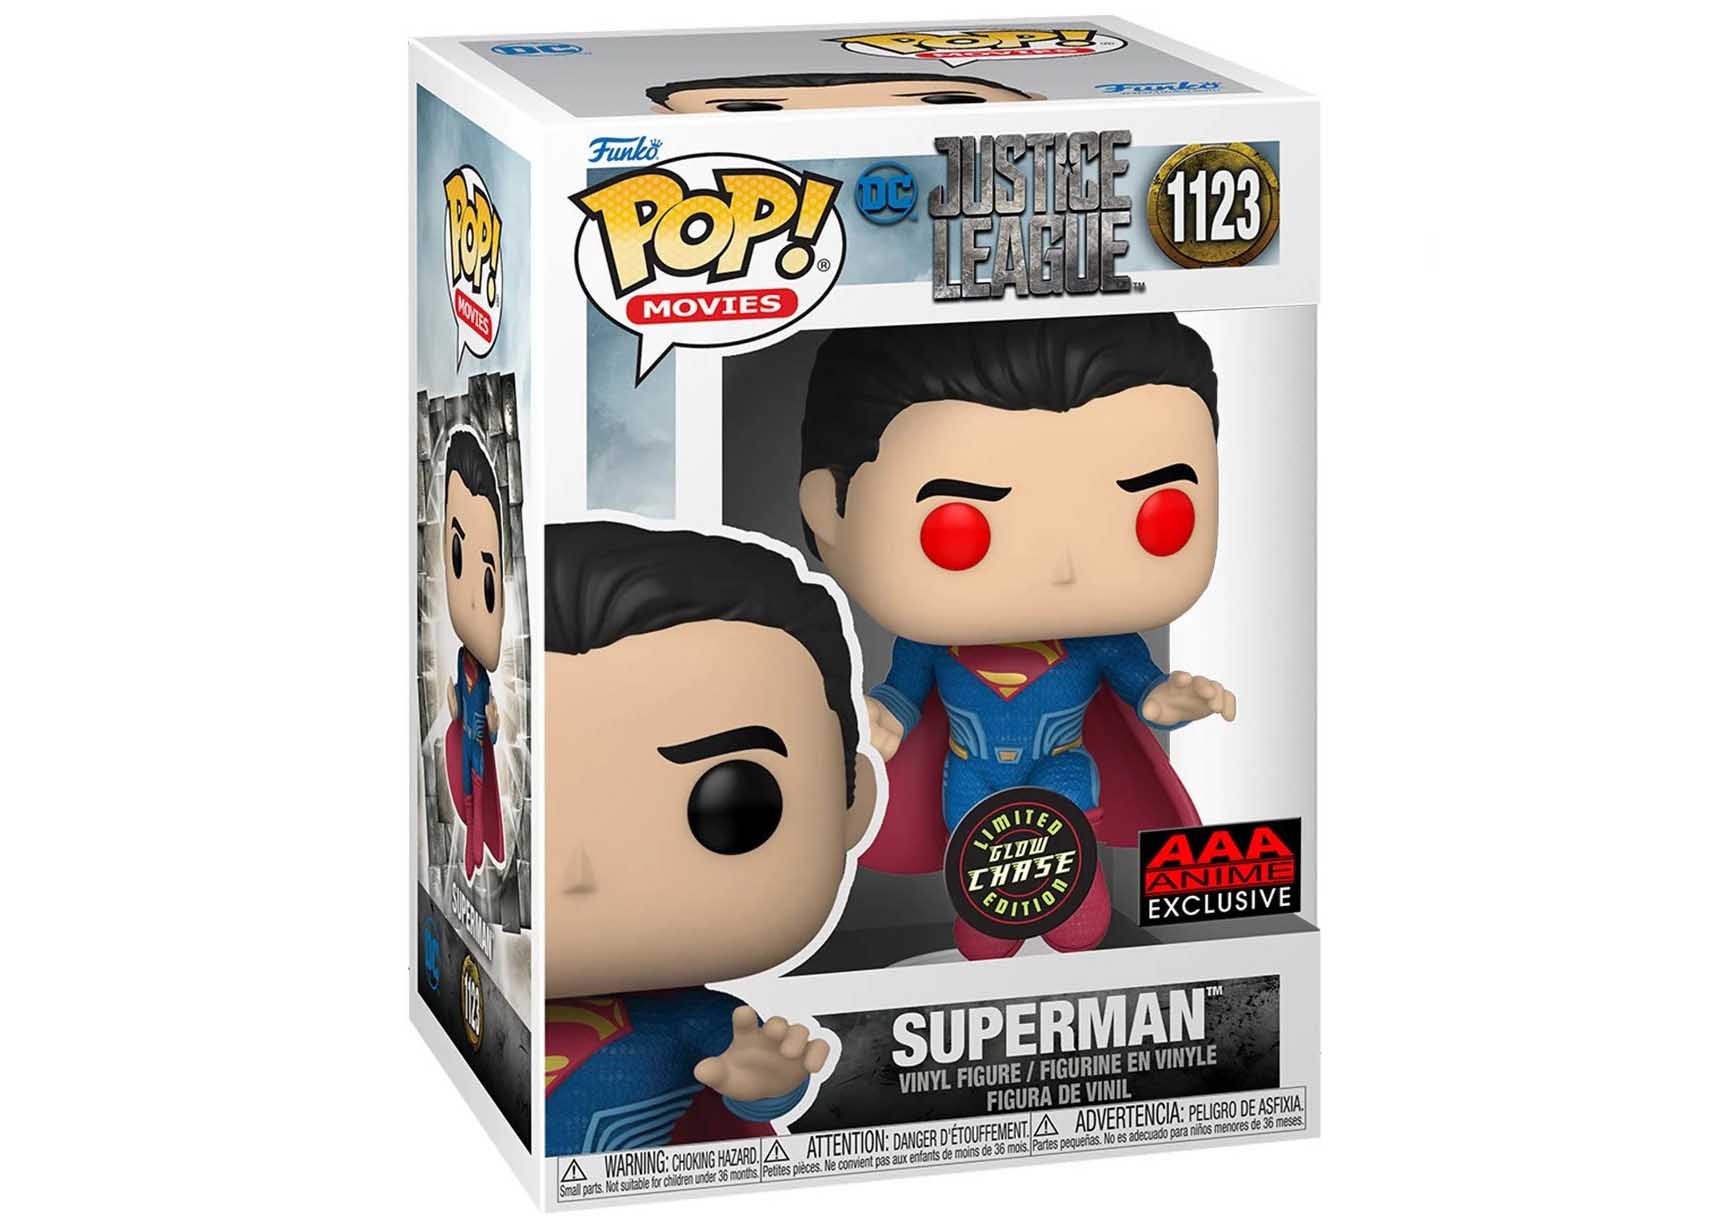 Funko Pop! Movies DC Justice League Superman GITD Chase Edition